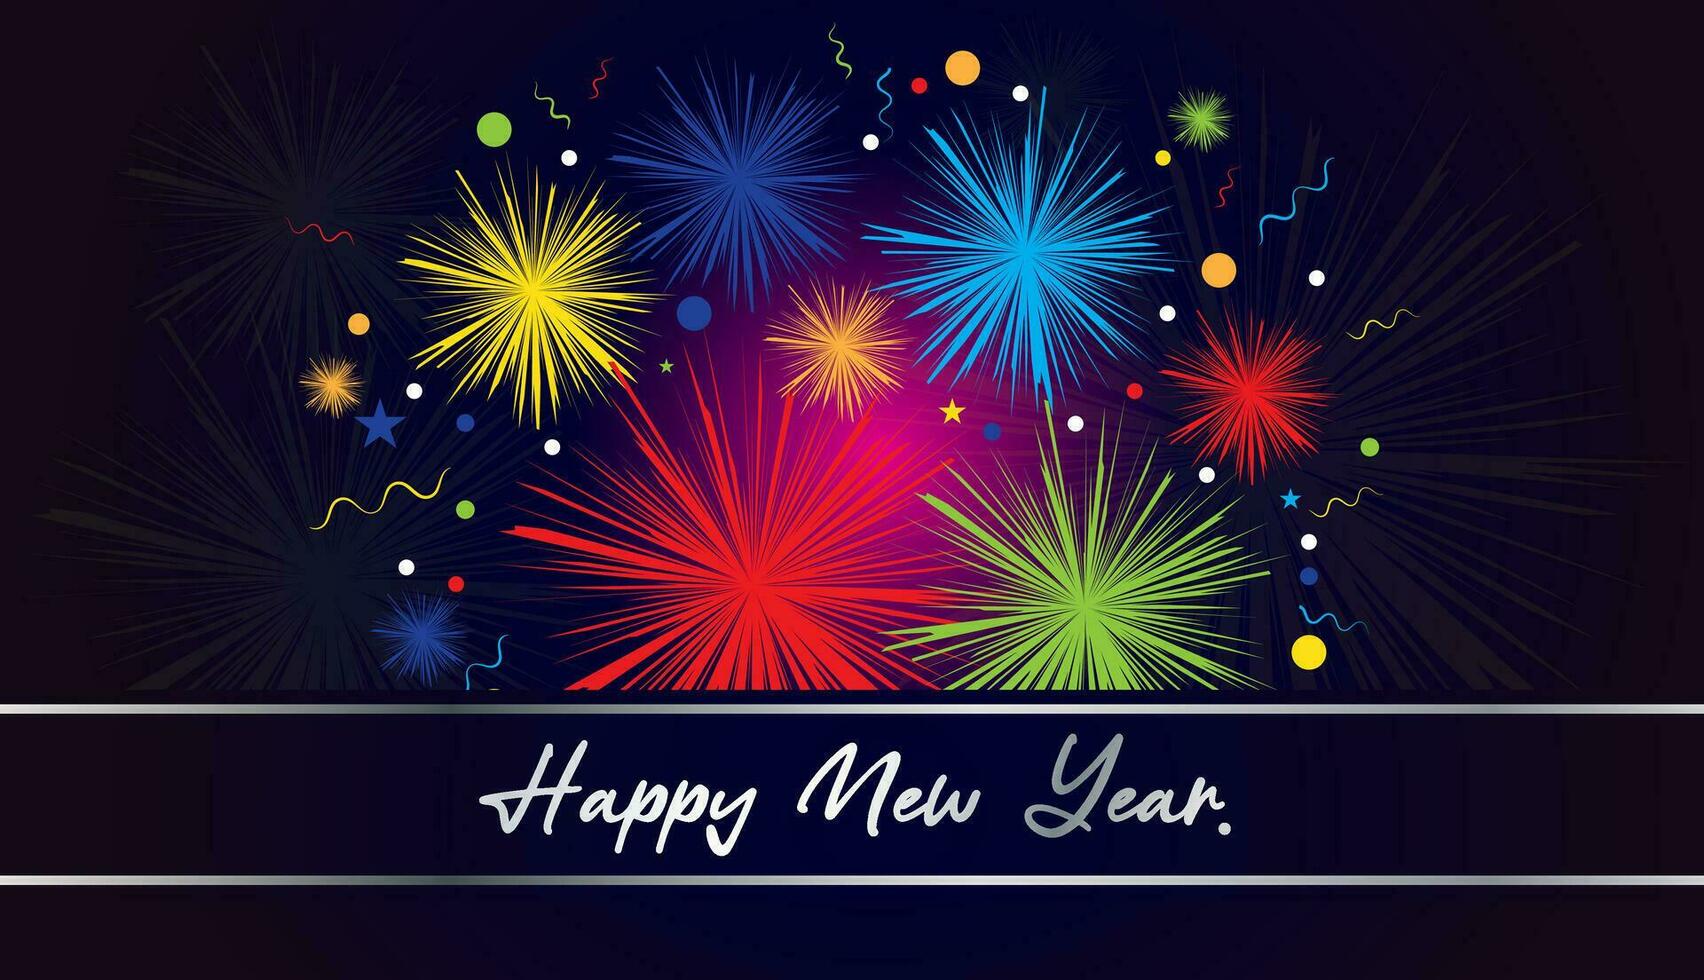 Happy New Year, this illustration can be used for your needs in the coming New Year vector